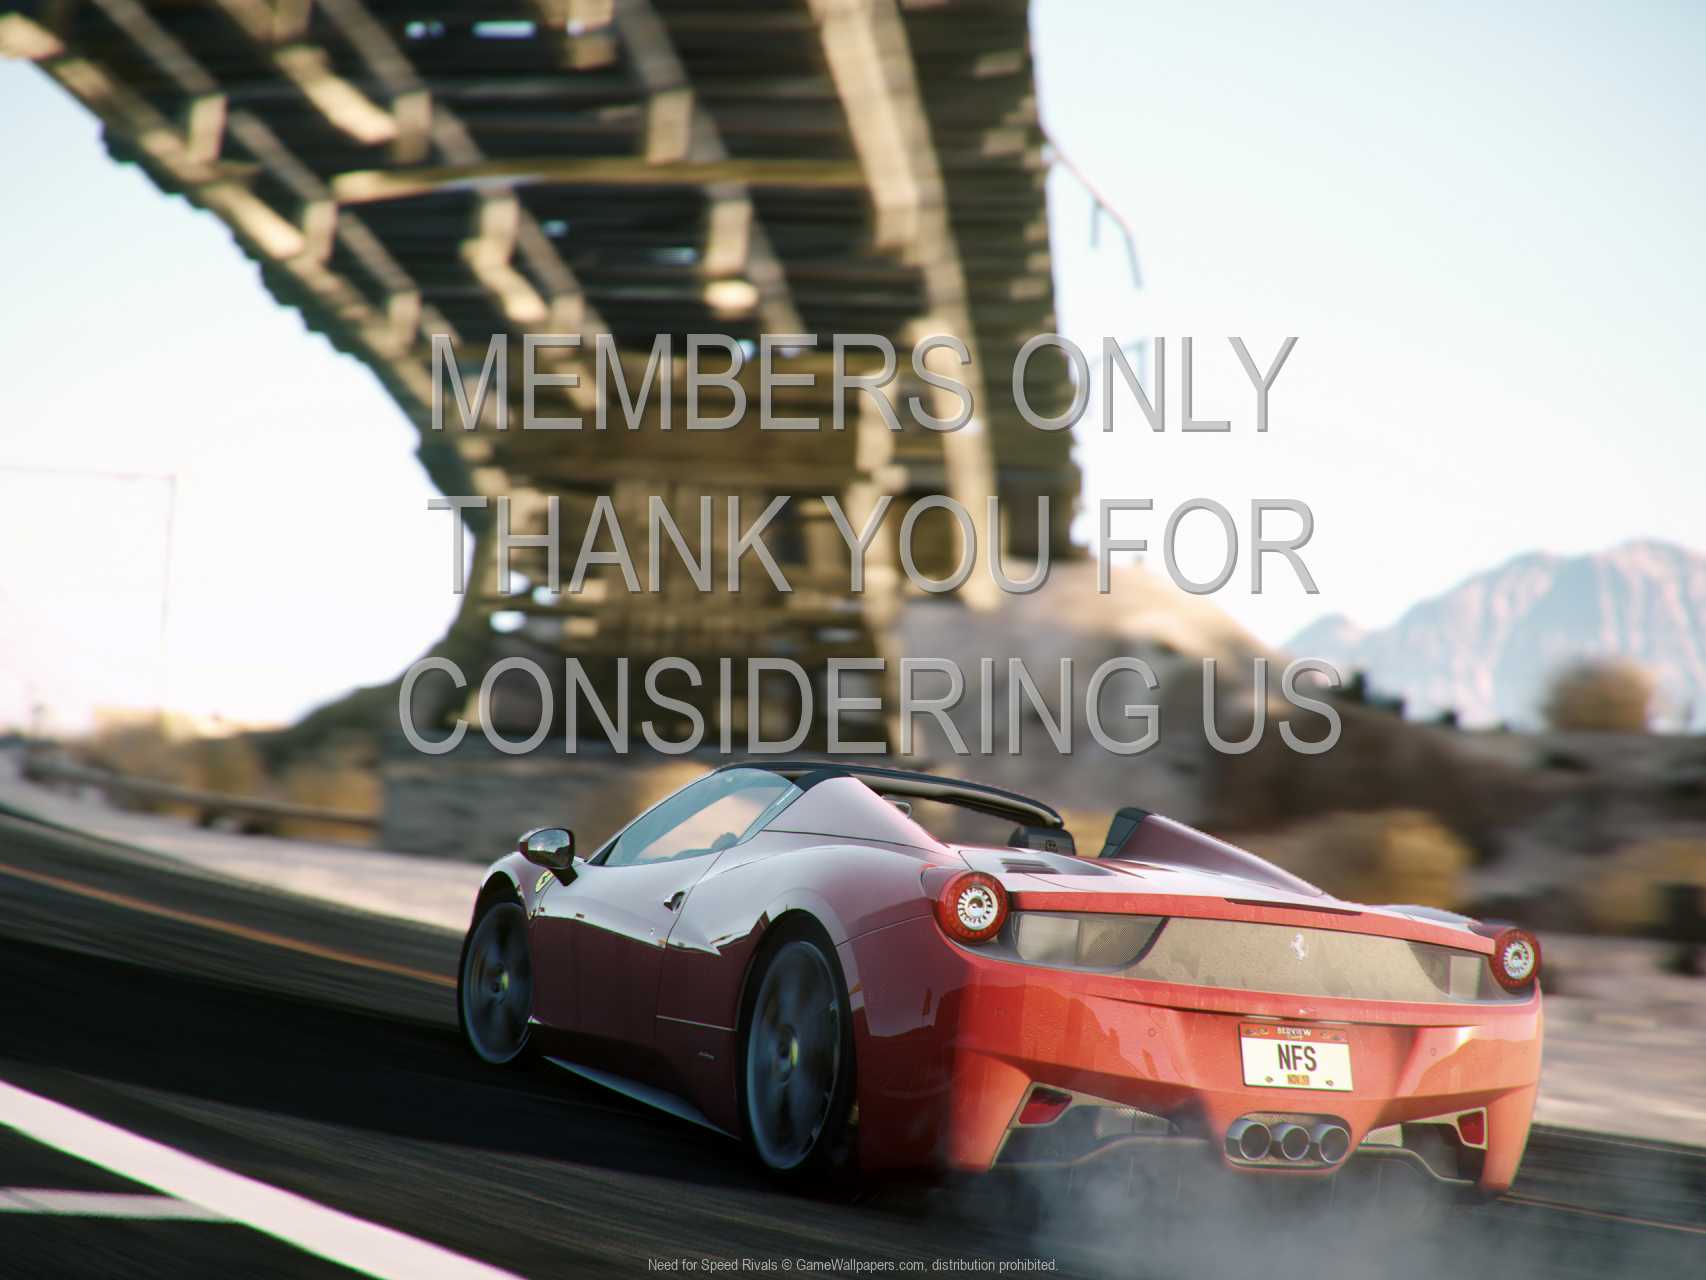 Need for Speed Rivals 720p%20Horizontal Mobile fond d'cran 06